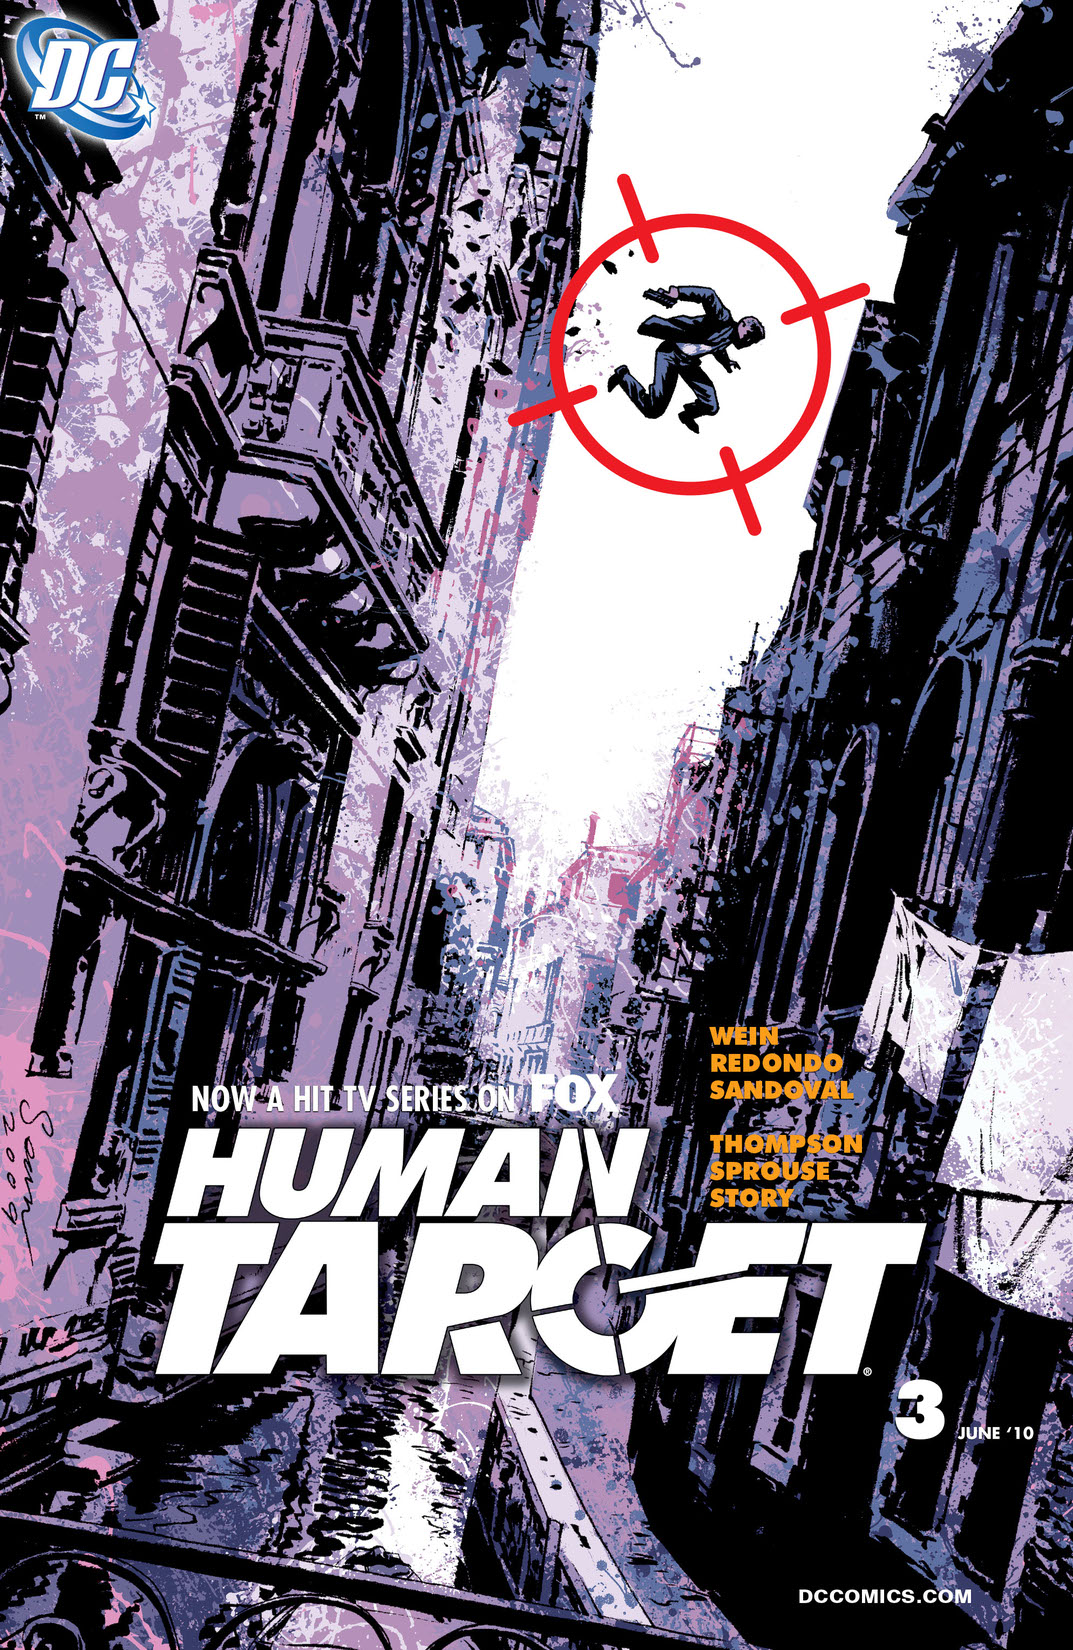 Human Target #3 preview images